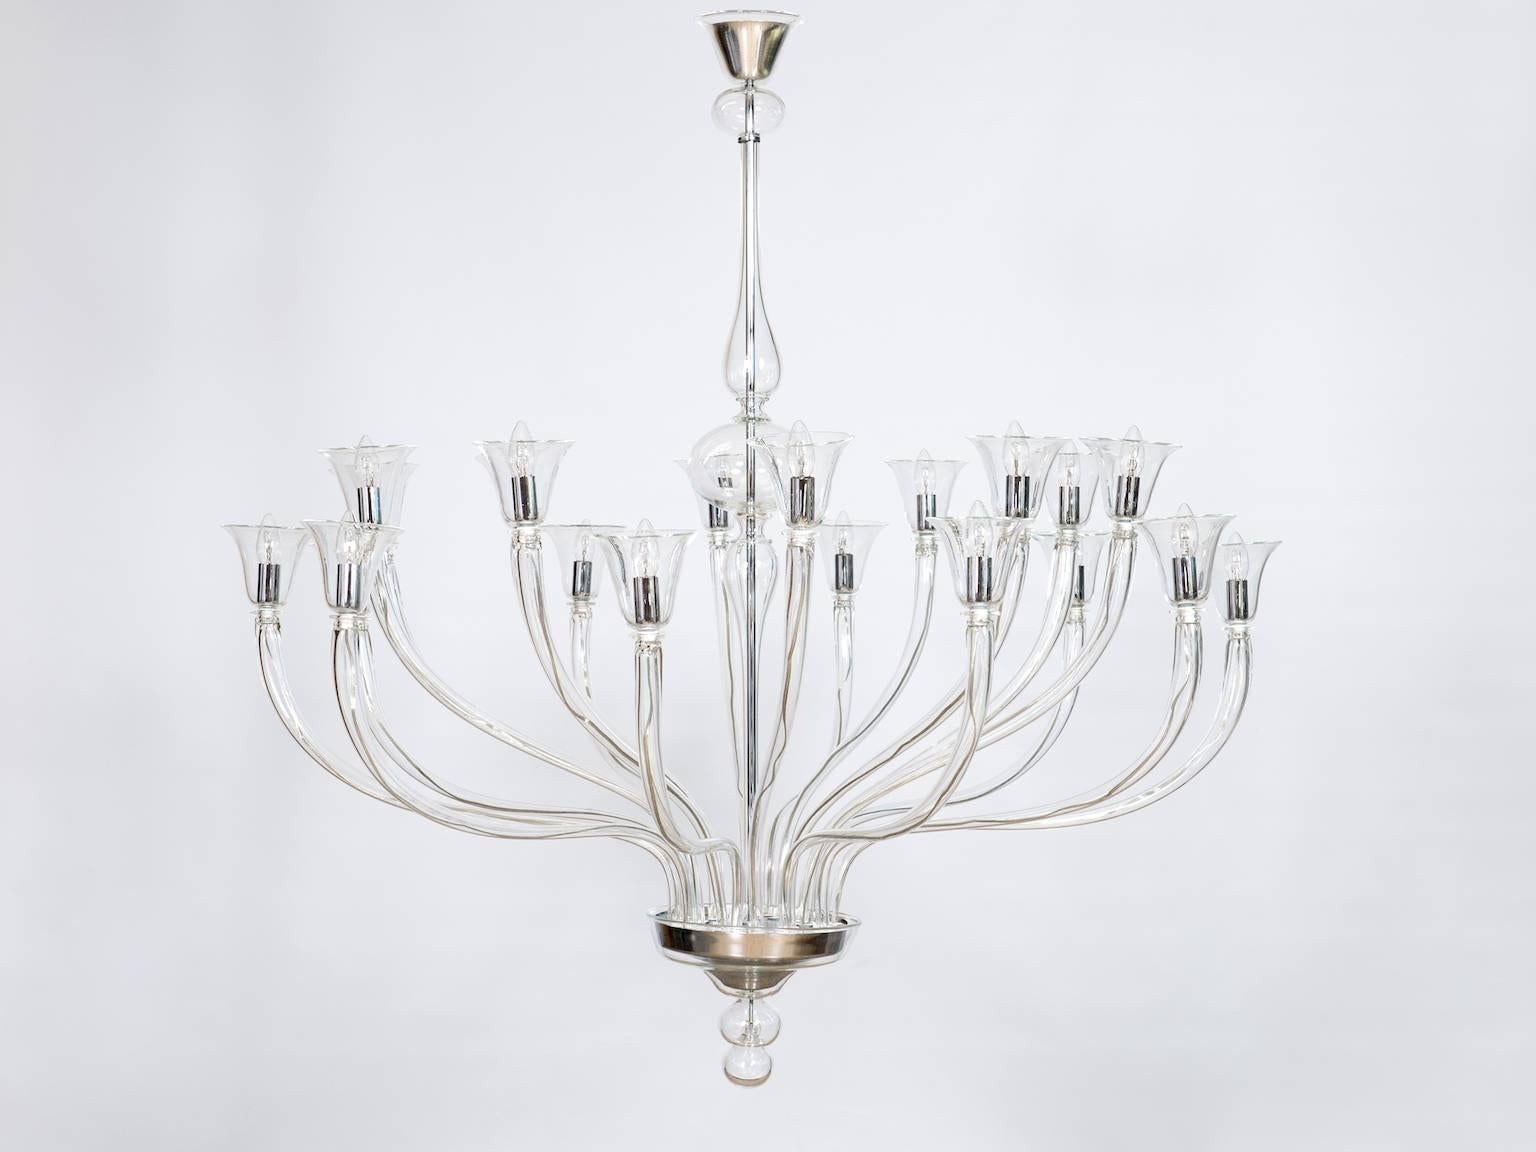 Modern Italian Venetian Handcrafted Chandelier in Transparent Murano Glass.
The chandelier was completely handcrafted by the Murano local blown-glass artists. This masterpiece was created following the old local artistic blown-glass school, as can